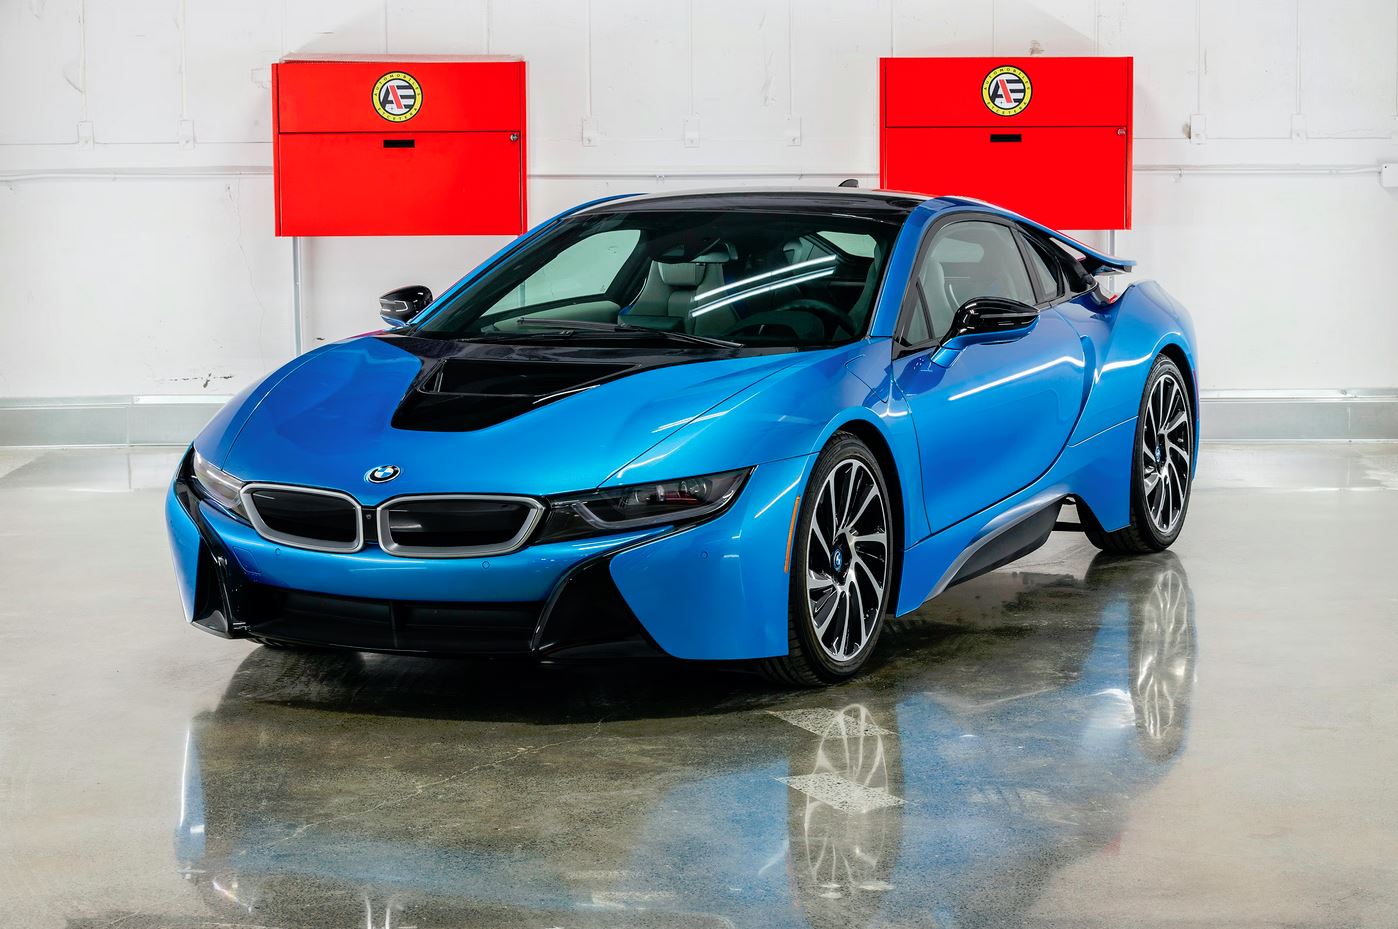 Practically New 2014 Bmw I8 Plug-In Hybrid Sports Car On Collecting Cars